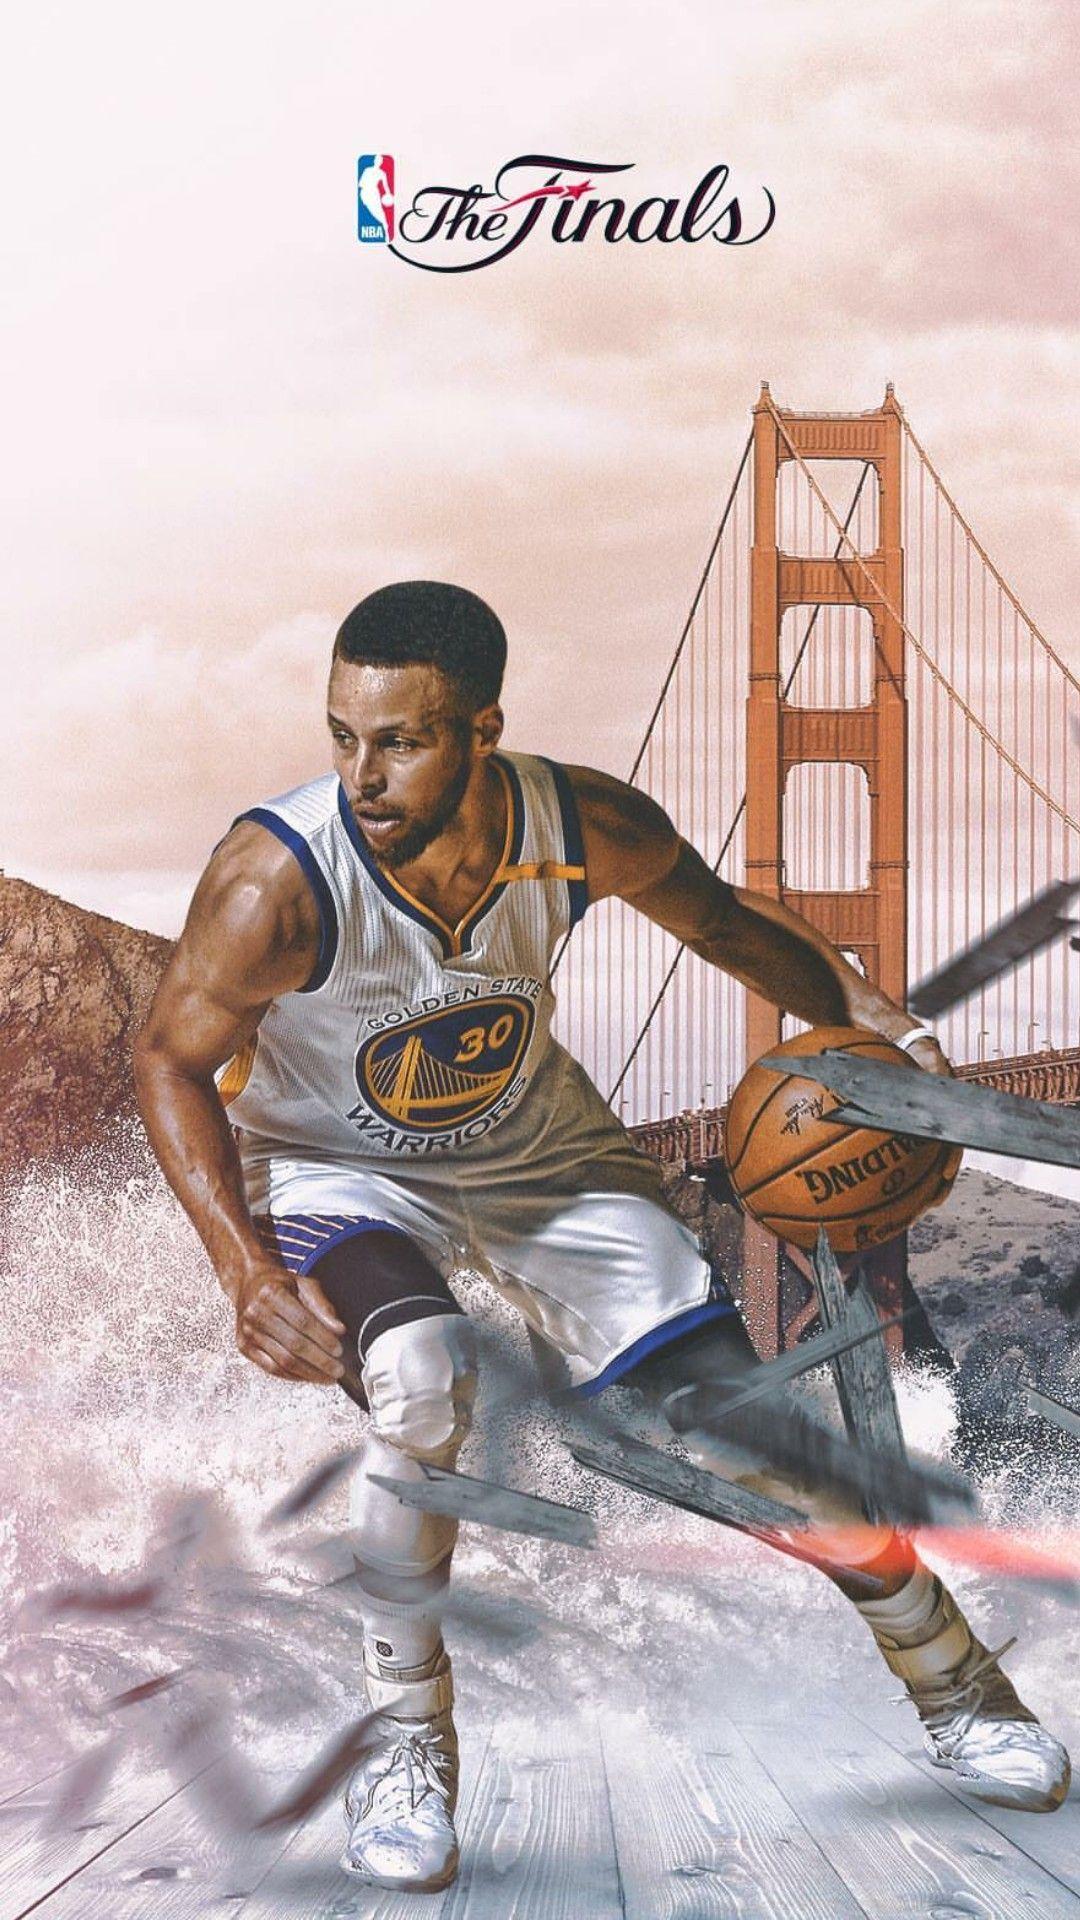 Stephen curry wallpaper. NBA. Stephen Curry, Stephen curry